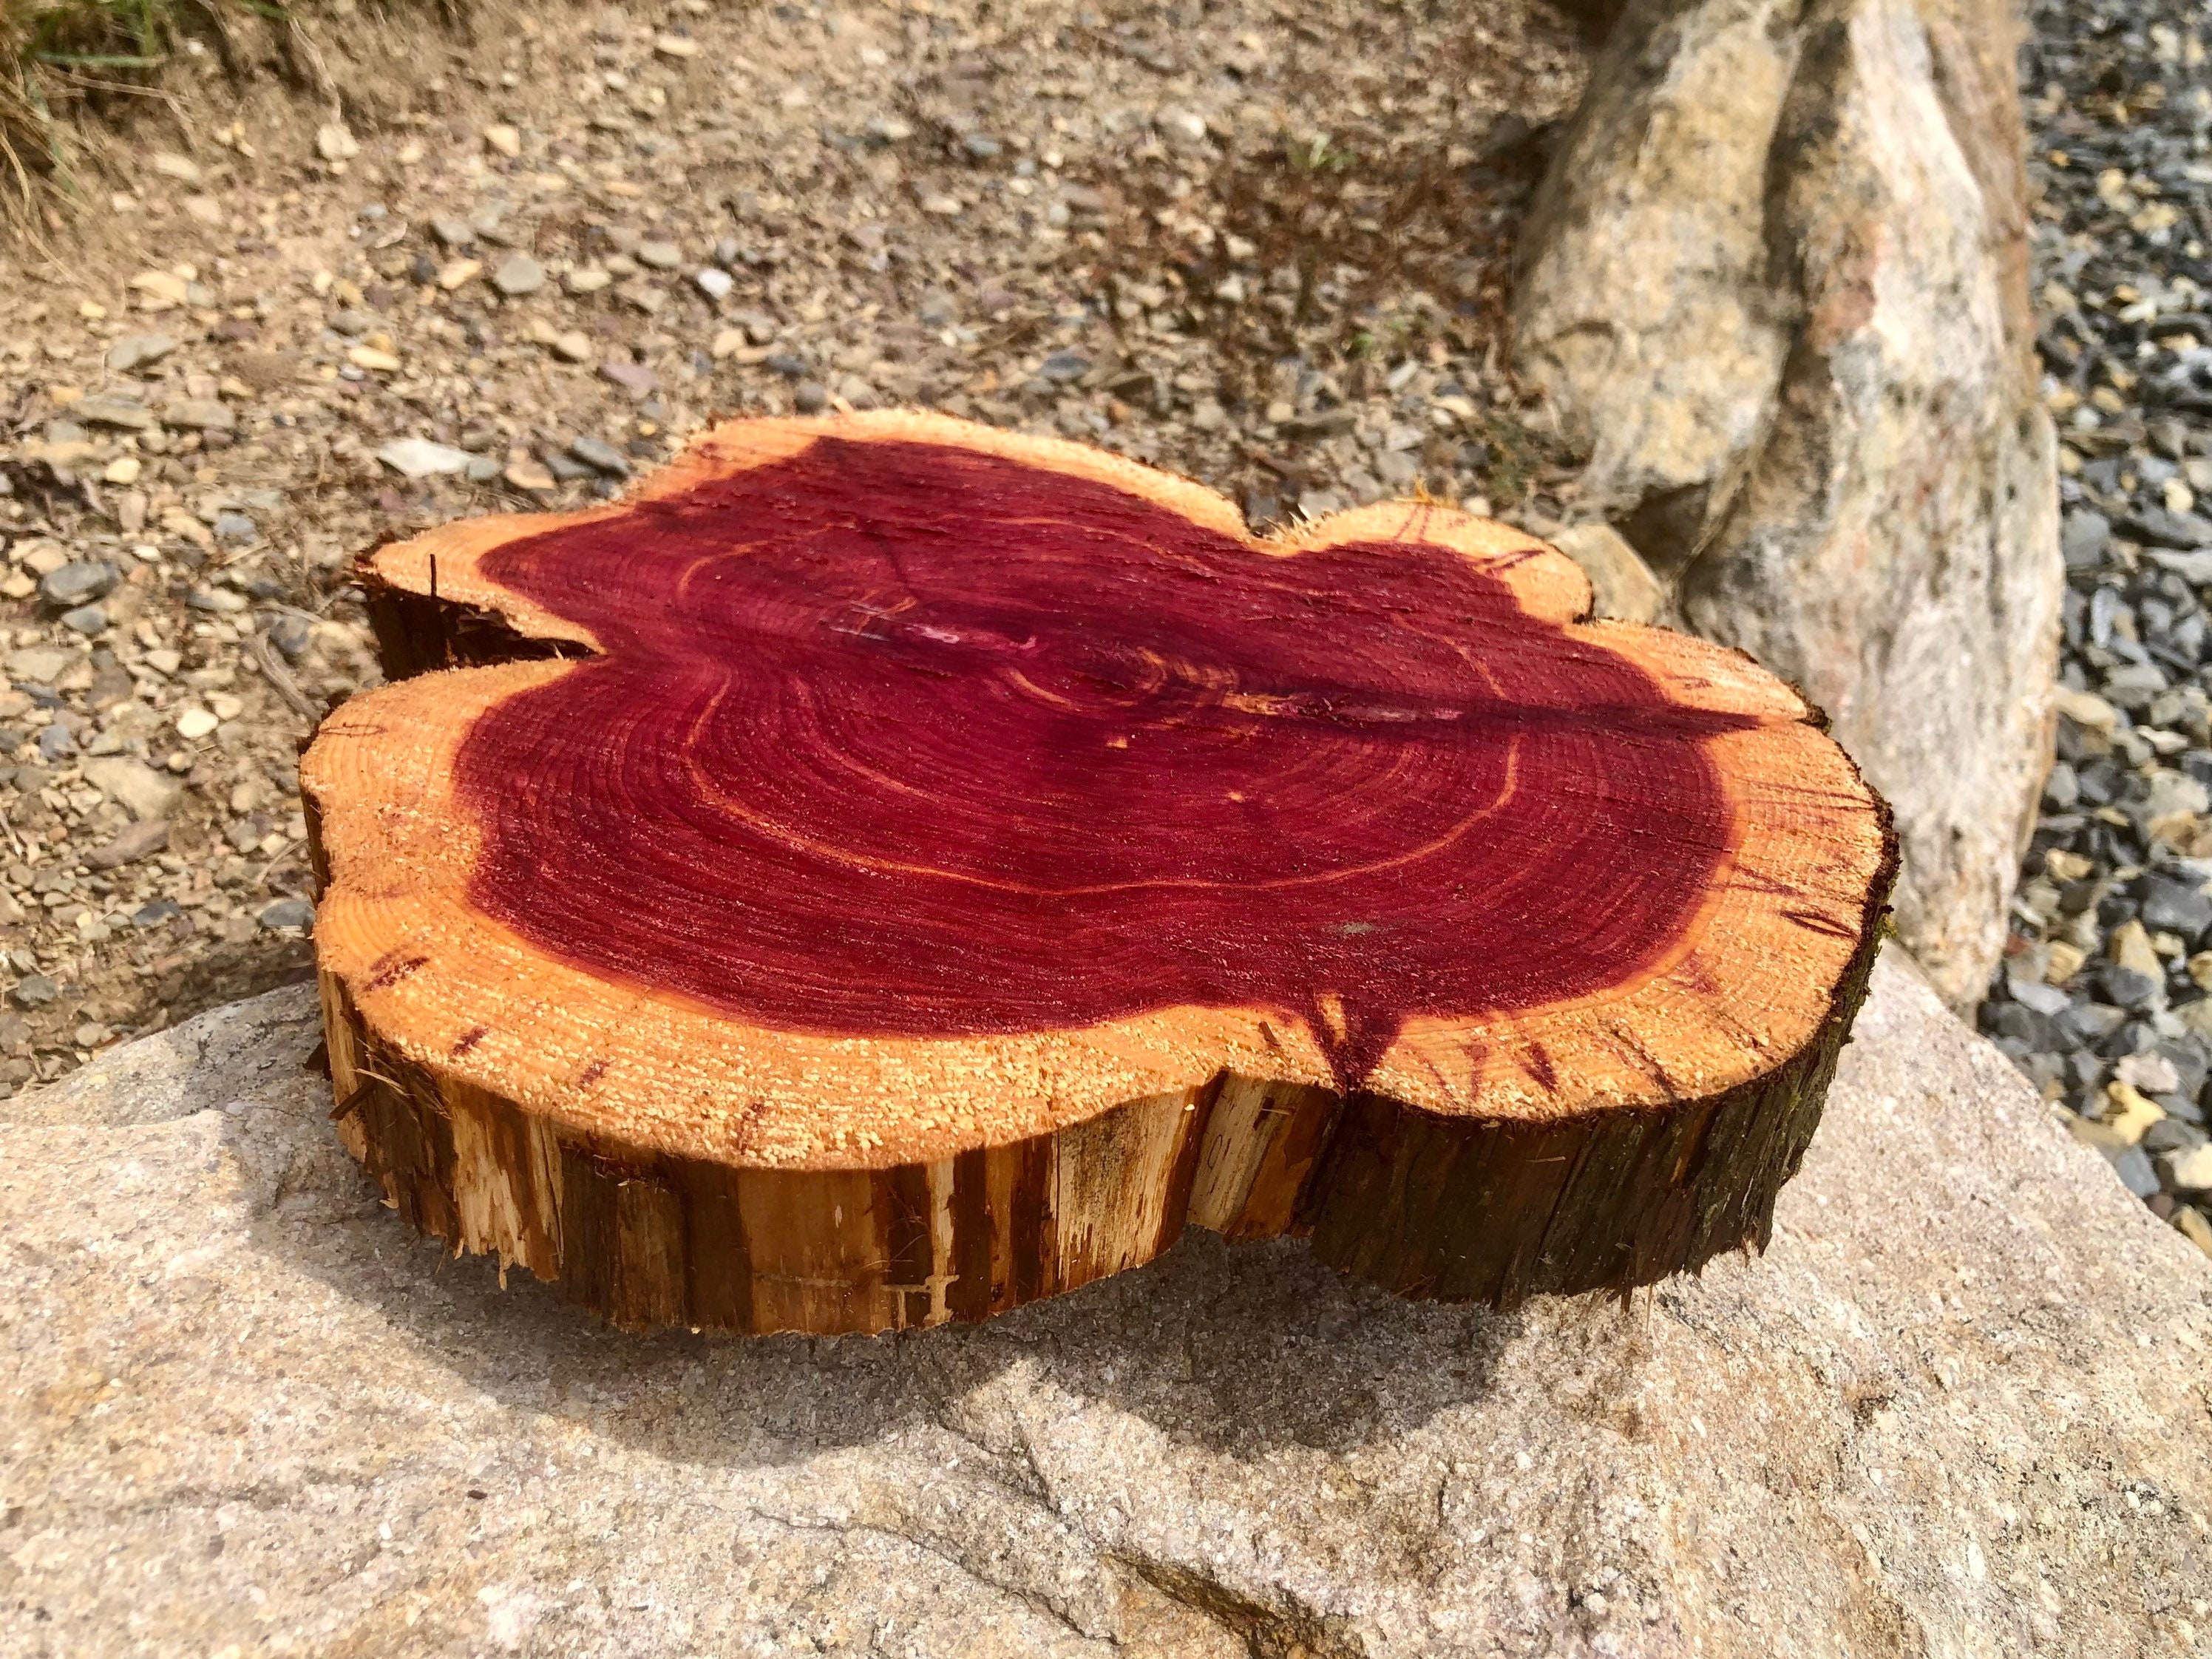 Just throwing linseed oil on some red cedar scraps I had : r